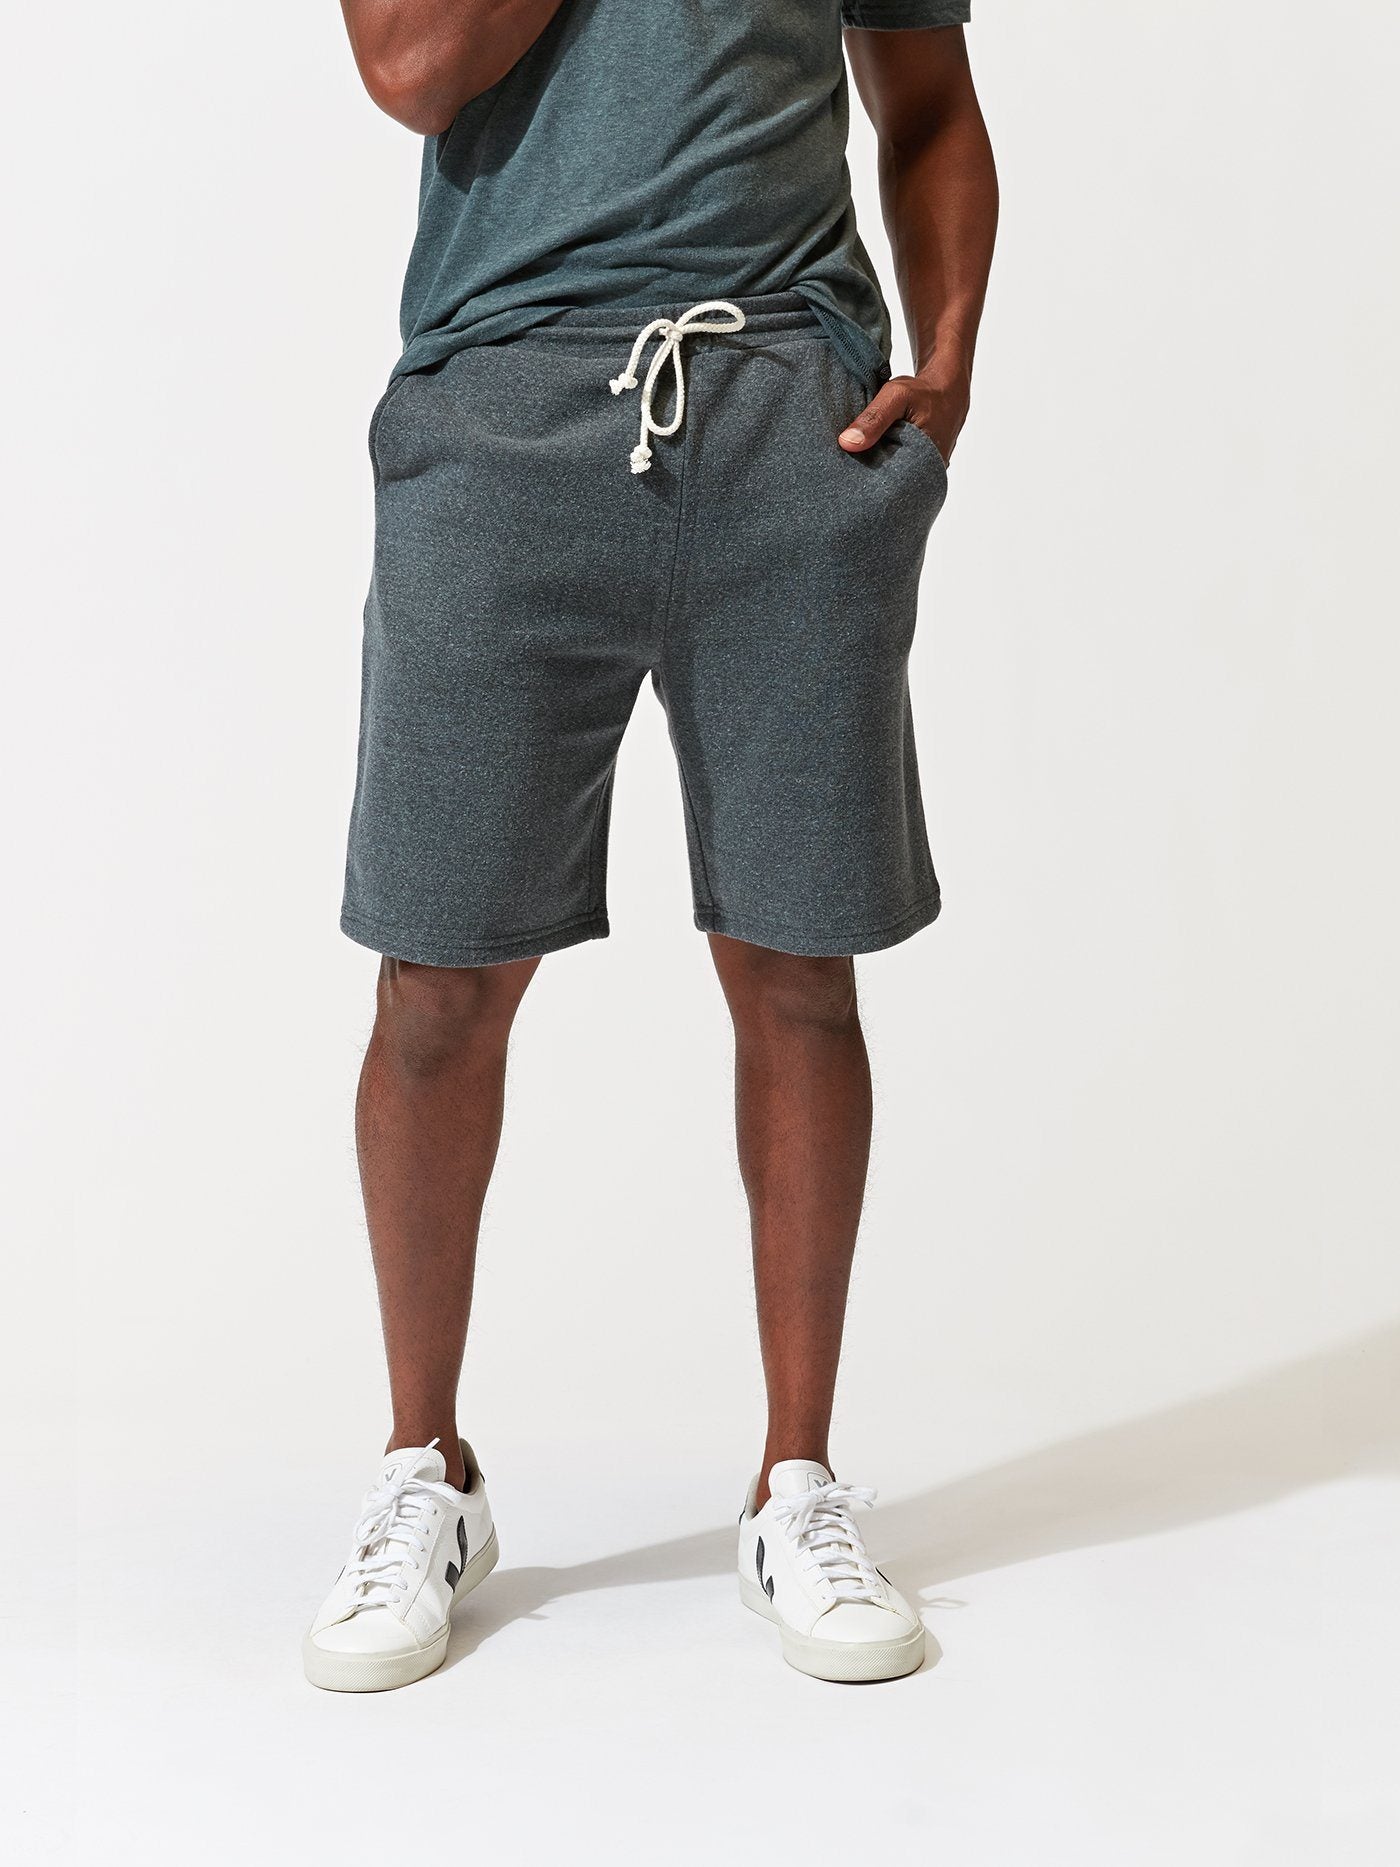 Men's Shorts – Threads 4 Thought